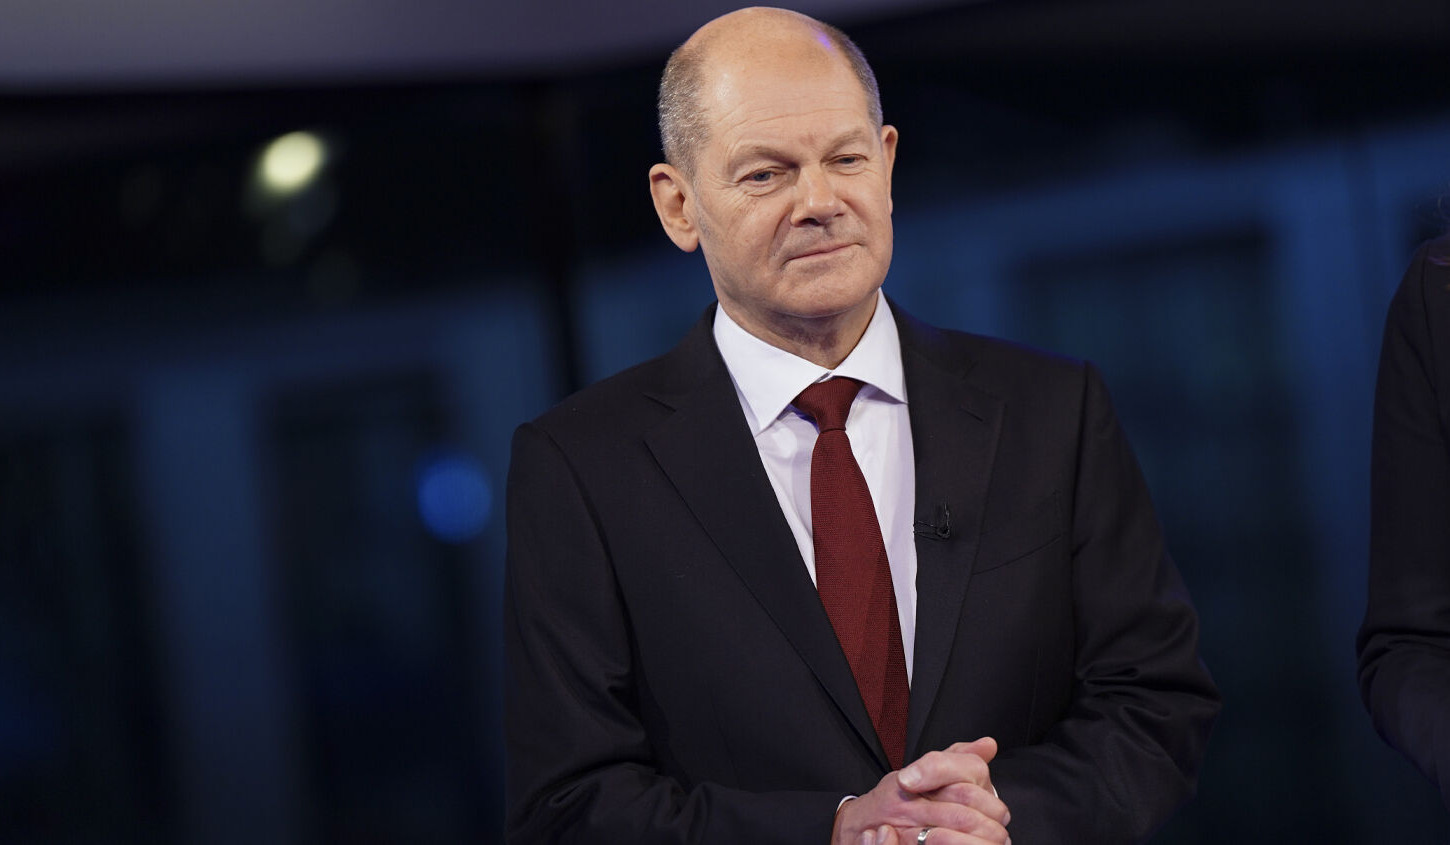 Germany's Scholz rebuffs suggestion of sending ground troops to Ukraine